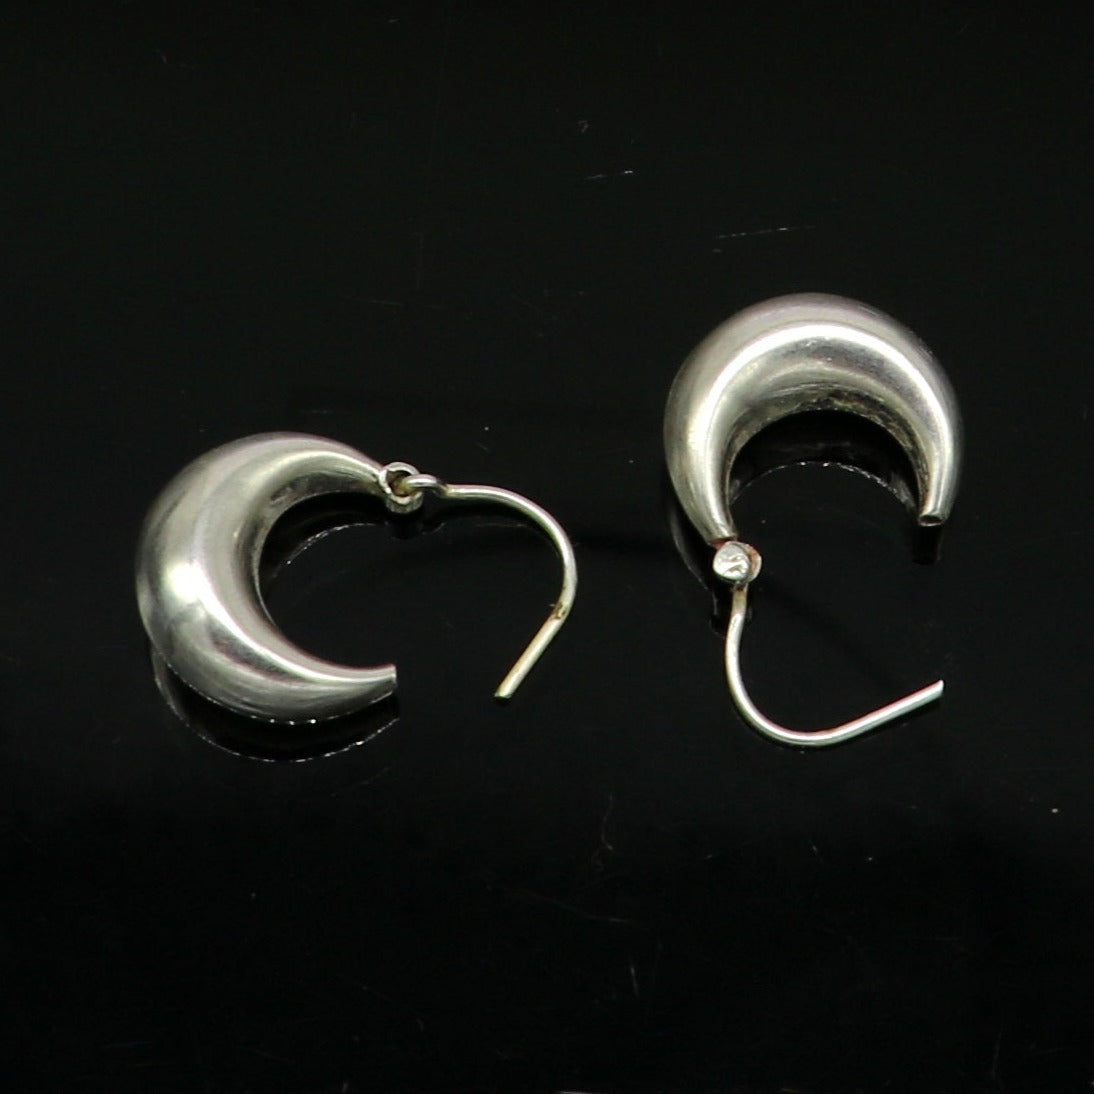 Pure 925 sterling silver handmade hoops kundal earring, excellent designer fancy daily use hook earring ear wire tribal vintage jewelry s892 - TRIBAL ORNAMENTS